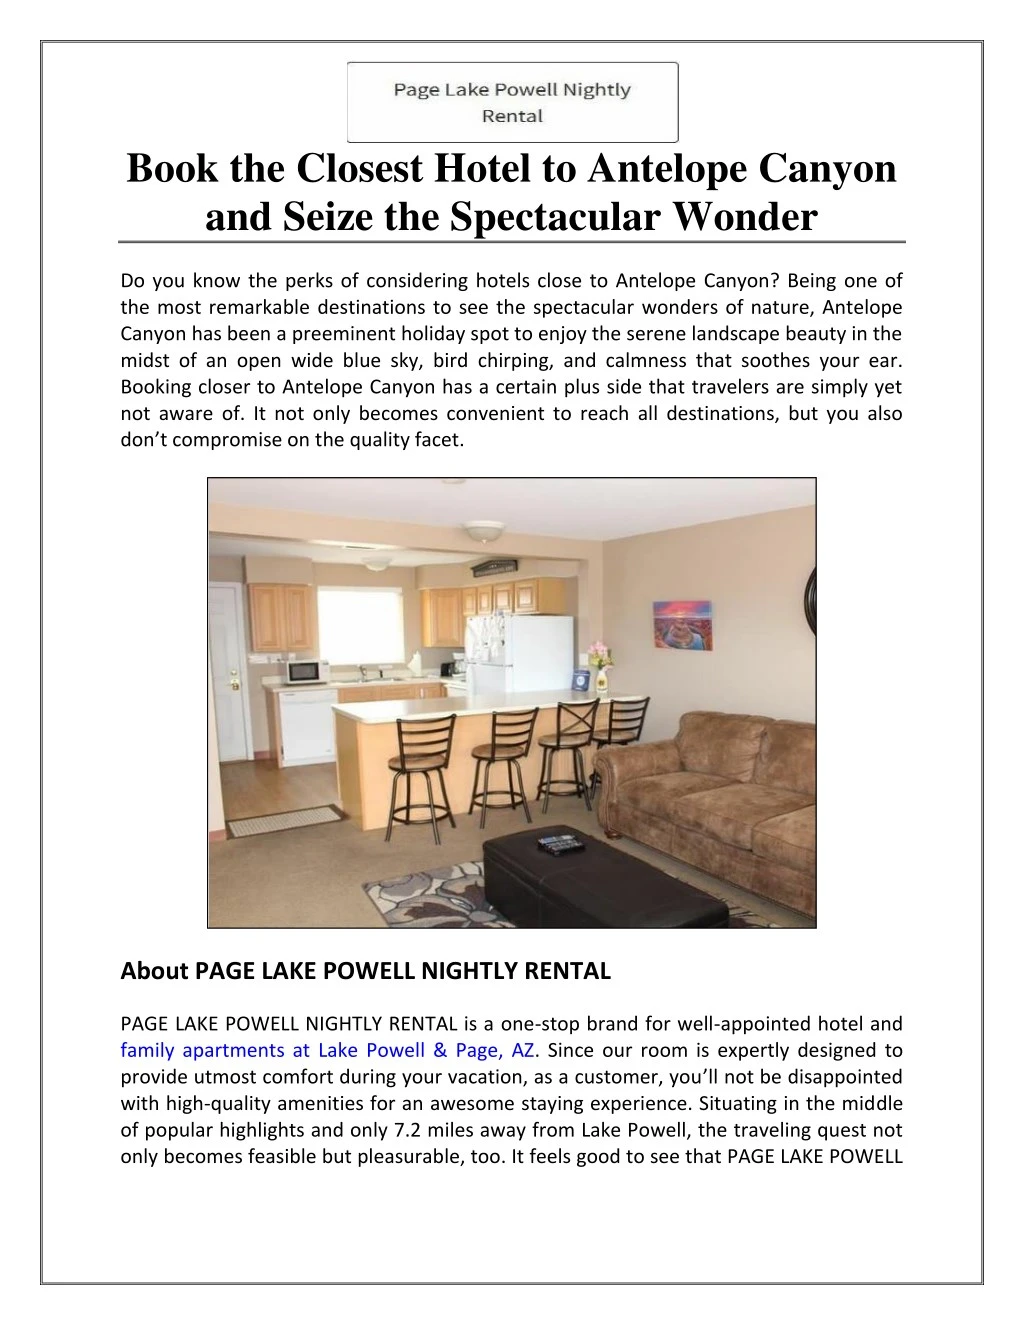 book the closest hotel to antelope canyon